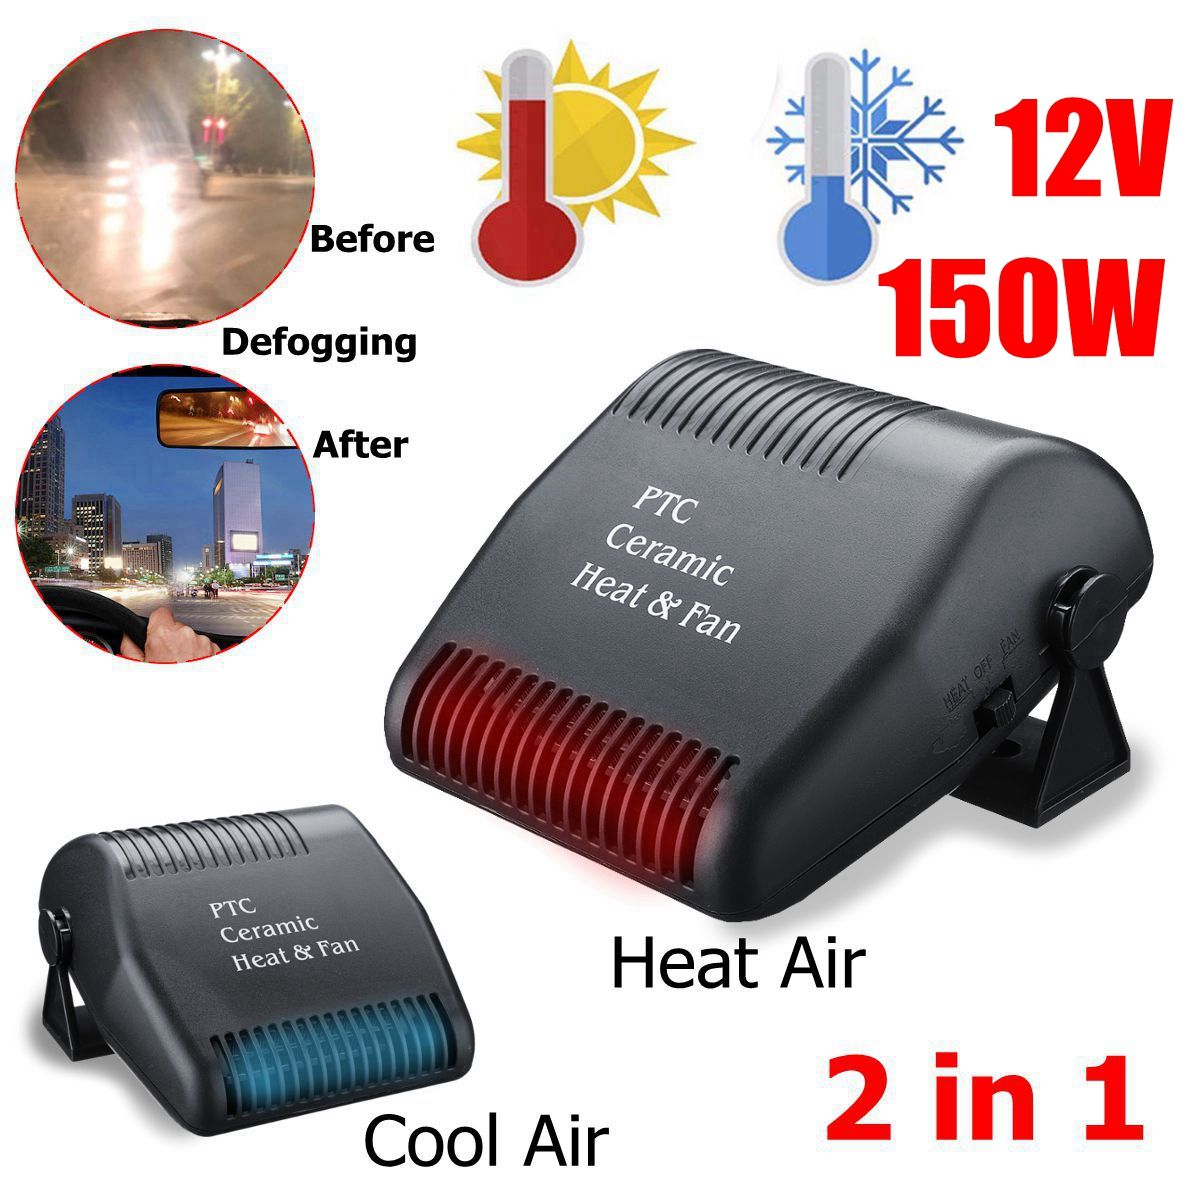 150W-12V-Car-Heater-Car-Defroster-Winter-Auto-Electric-Stove-Fan-Heating-Cooling-Integrated-Defrosti-1584740